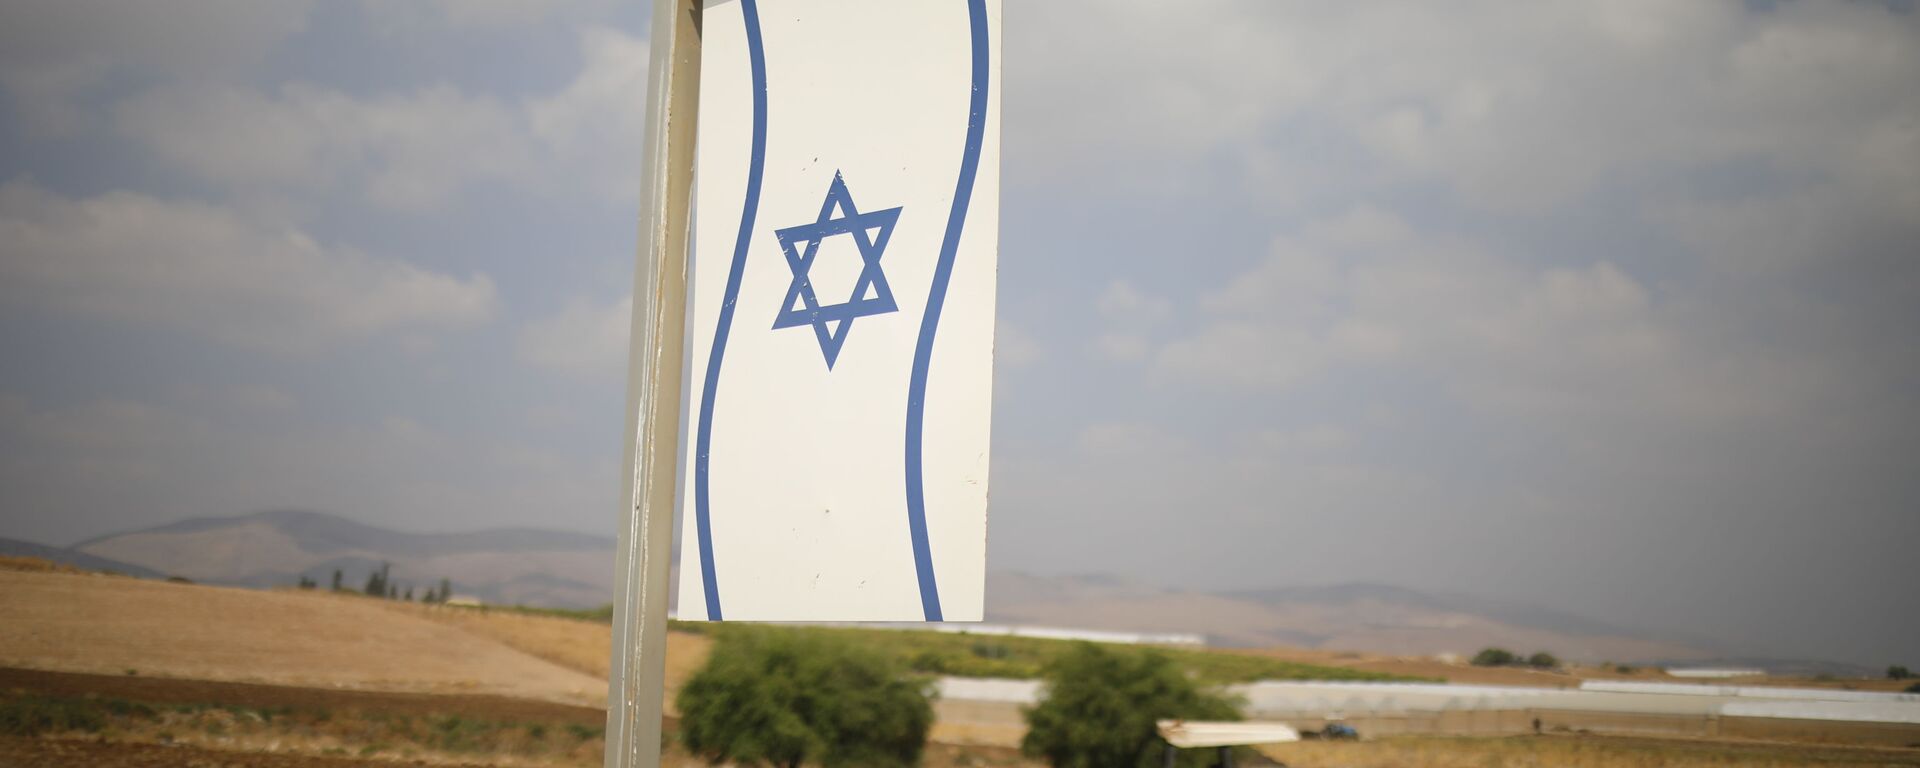 A Palestinian man works on a farm near Bardala, in the Israeli-occupied West Bank, Wednesday, Sept. 11, 2019. Israeli Prime Minister Benjamin Netanyahu’s election eve vow to annex the Jordan Valley if he is re-elected has sparked an angry Arab rebuke and injected the Palestinians into a campaign that had almost entirely ignored them. (AP Photo/Ariel Schalit) - Sputnik International, 1920, 04.02.2021